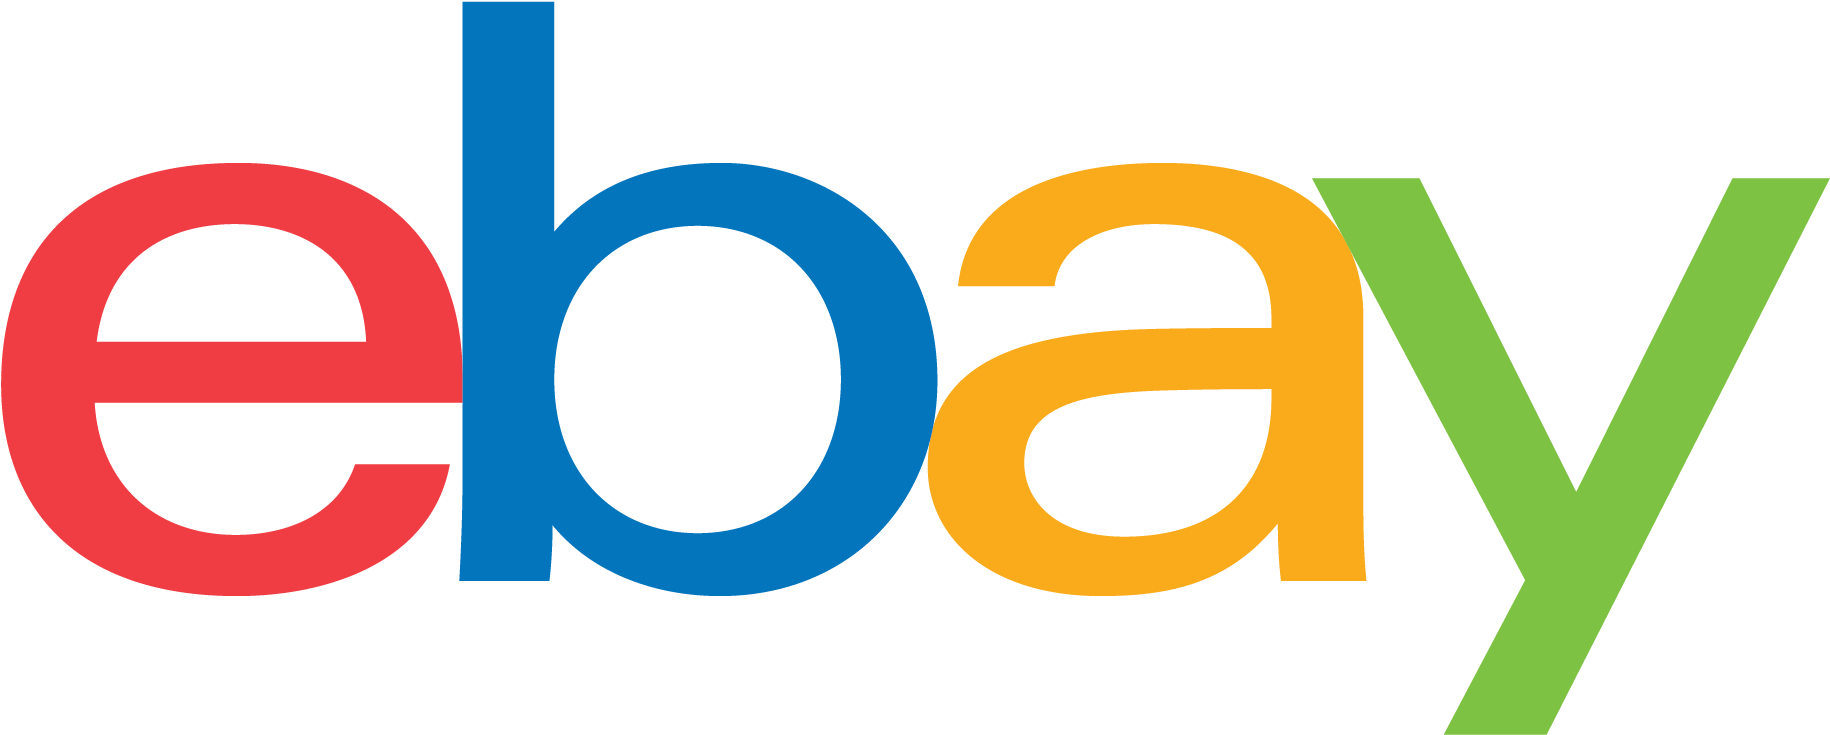 A Blue And Yellow Letters On A Black Background